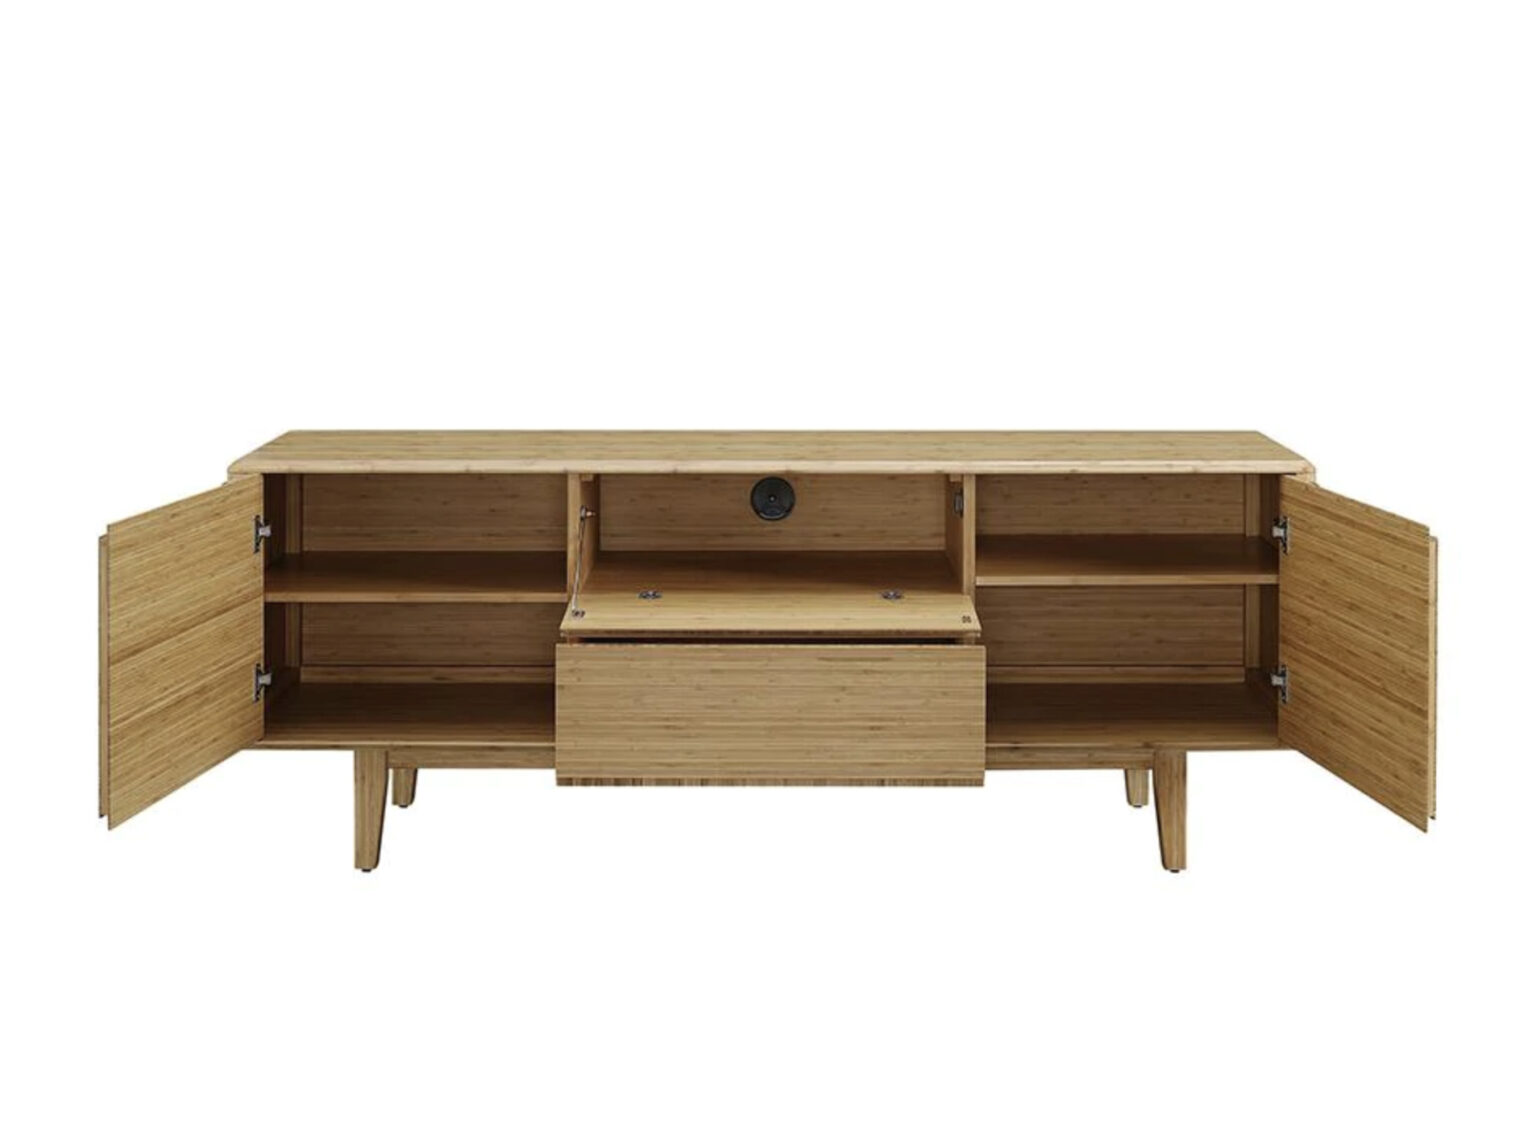 currant-sideboard-media-center-caramelized-bamboo-inside-view_greenington